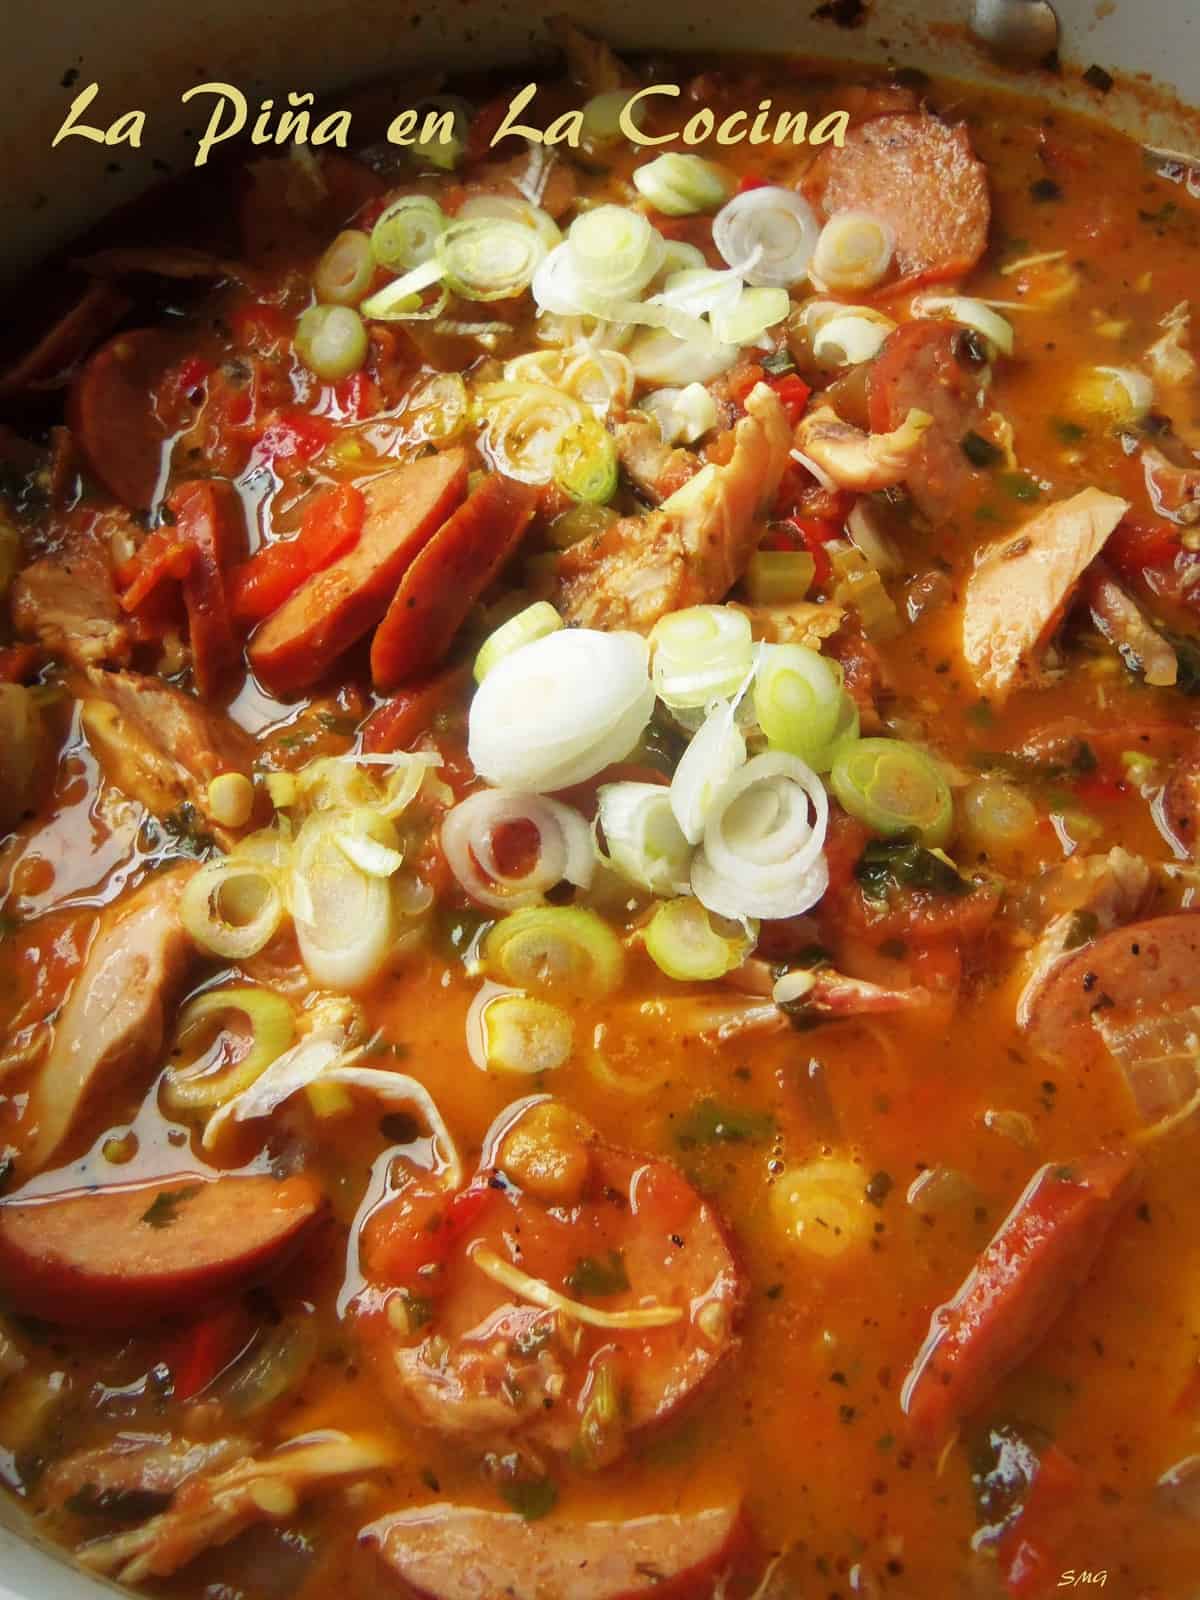 Fusion cooking is one of my favorite ways to creat and develop new recipe. Creole ans Mexican flavors make up this rich and tasty stew.